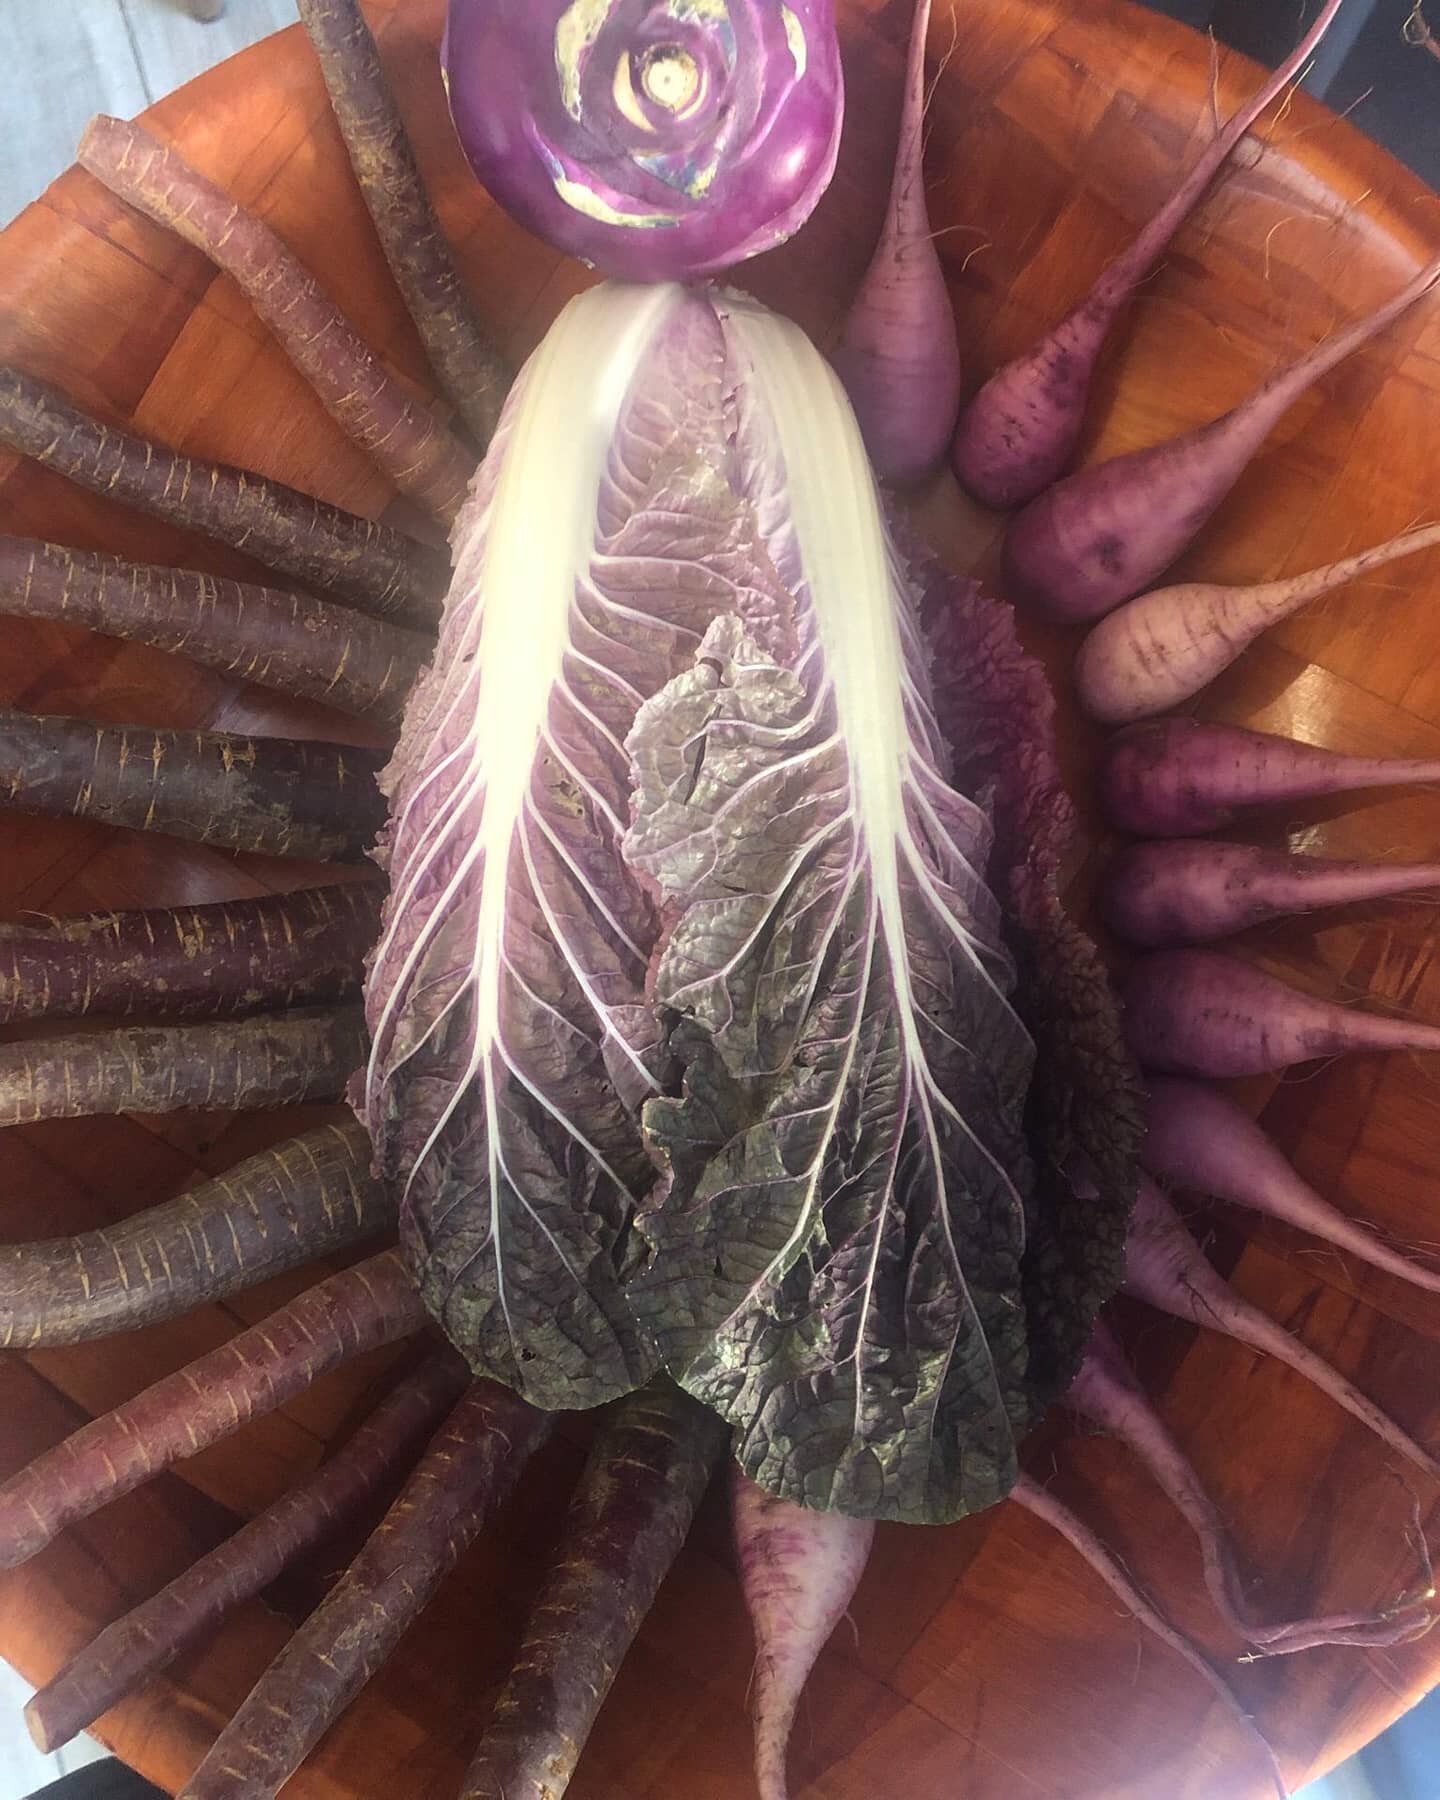 Happy Friday PasaPasa Family 💜
Wishing byou all a lovely weekend 🥳🥳🥳

Feeling purple today . Purple kohlrabi, purple baby daikon, purple carrots, purple napa cabbage. 

Do like purple foods??

Purple fruits and vegetables are rich in anthocyanins